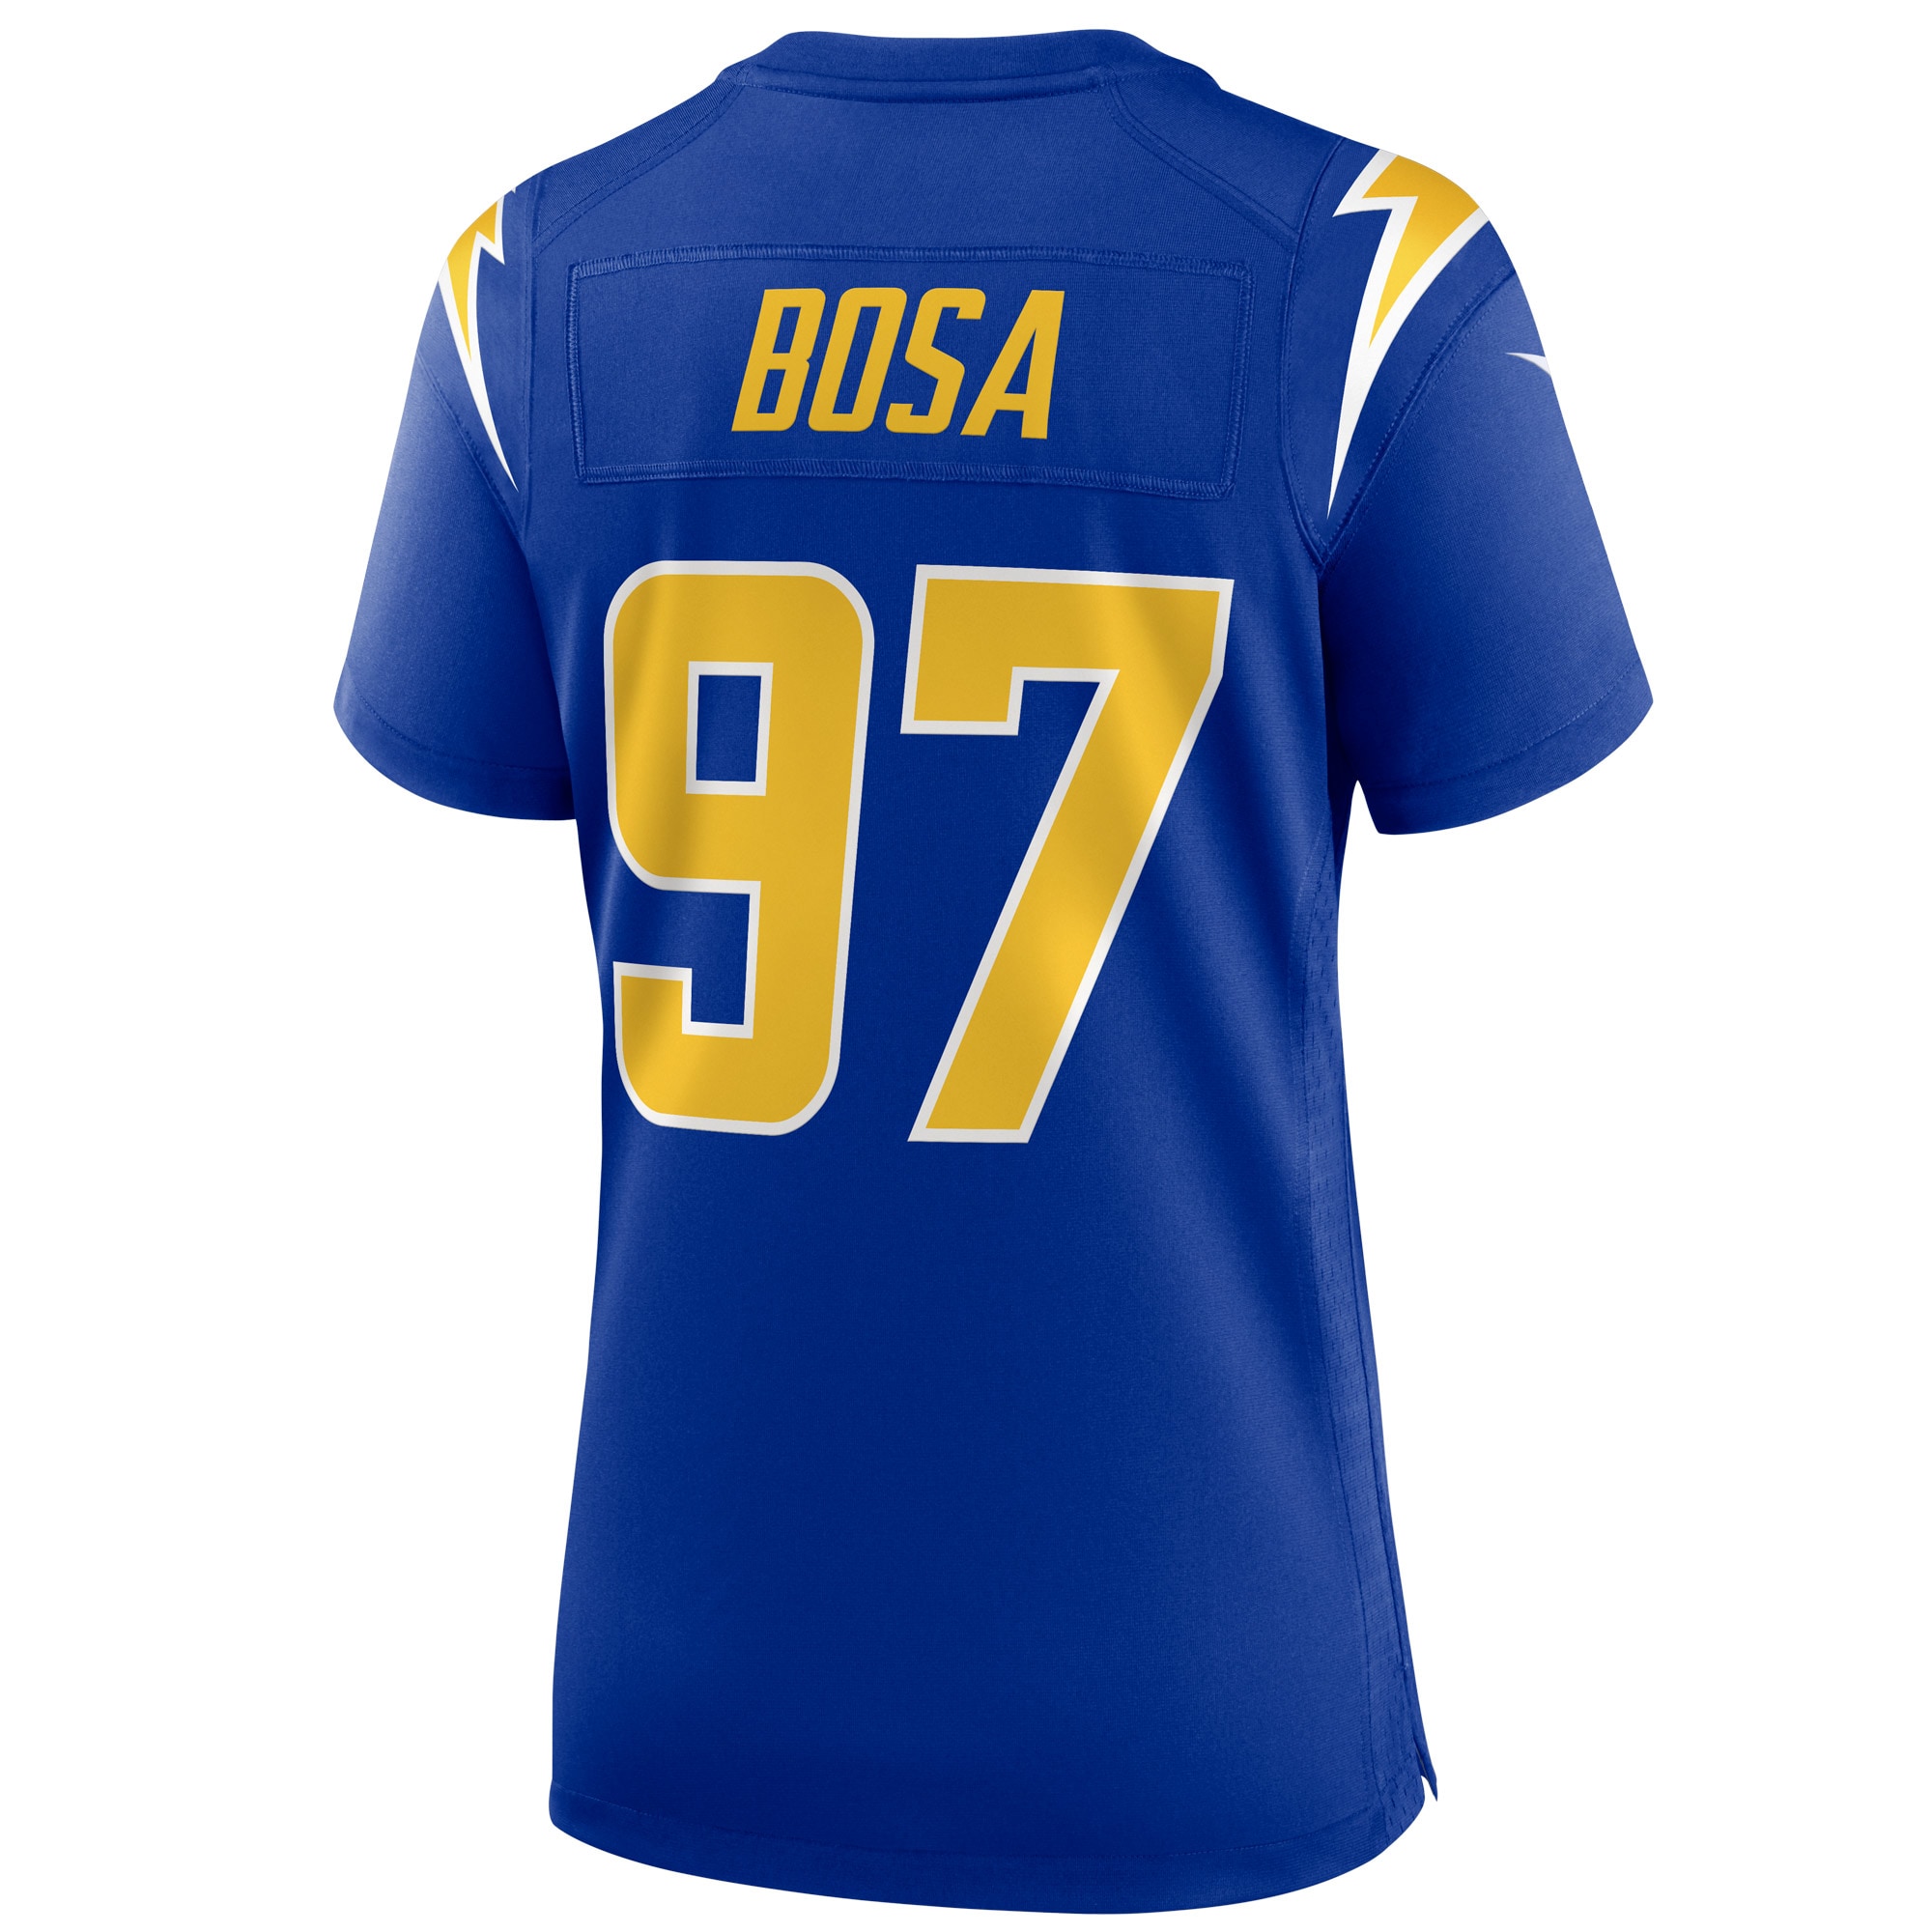 chargers alternate jersey